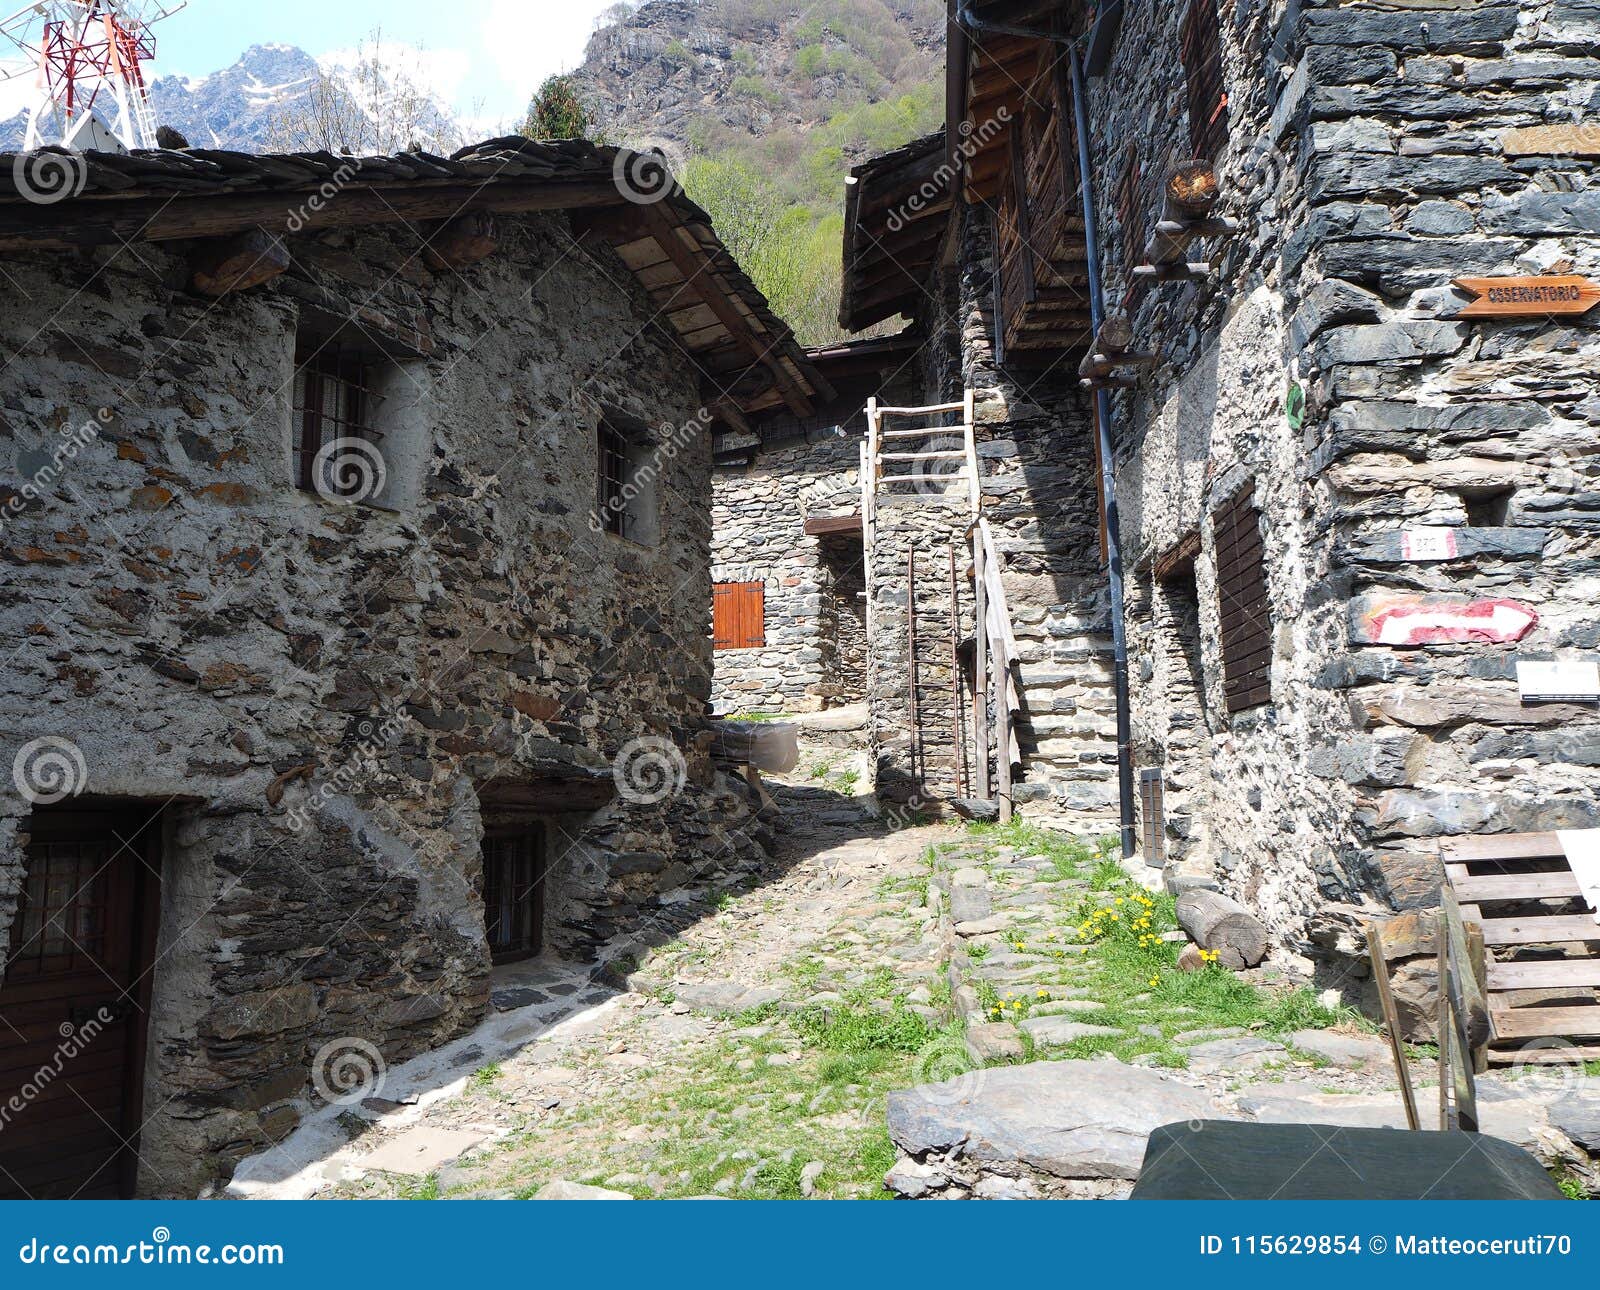 maslana is an ancient rural village accessible only on foot. valbondione, bergamo, orobie alps, italy